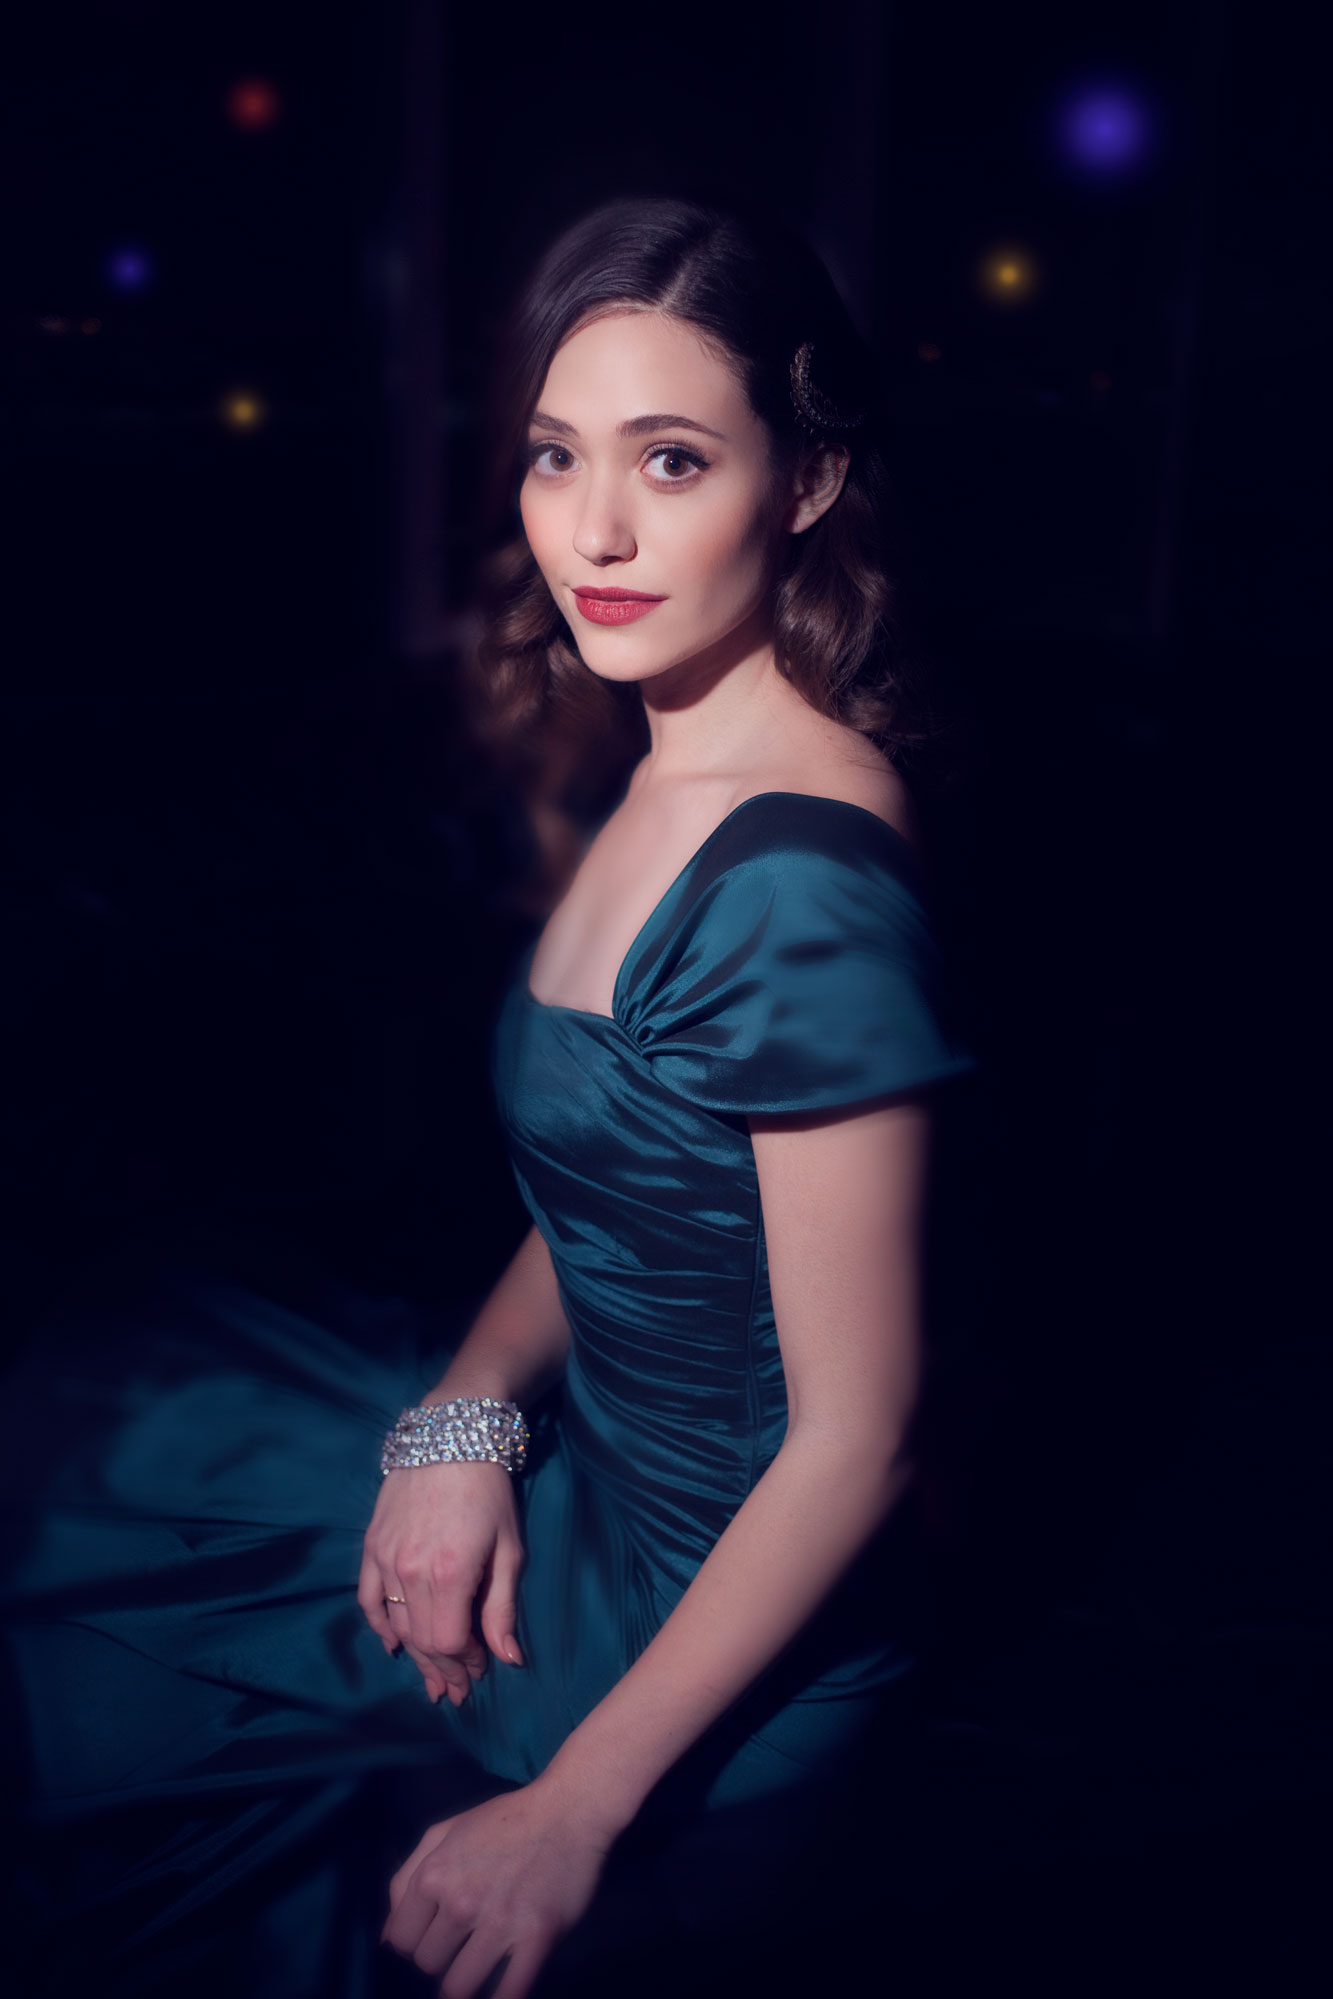 Editorial photography of Emmy Rossum for Manhattan Magazine by Jeff Fried an editorial photography expert - this example uses hard light